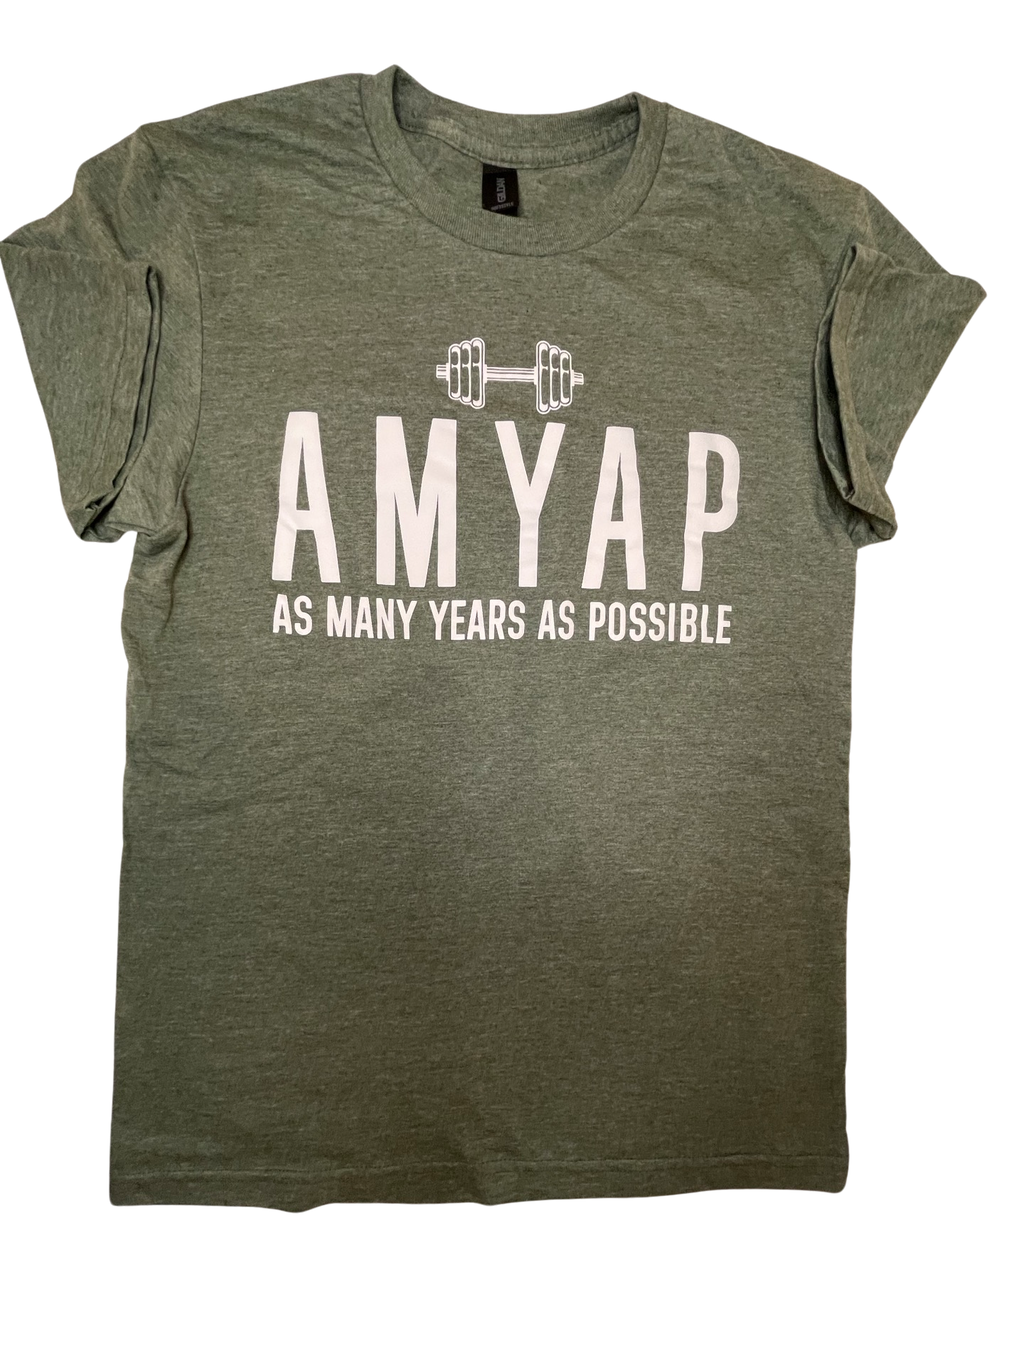 AMYAP (As Many Years As Possible)  t-shirt by Ageless Athletics